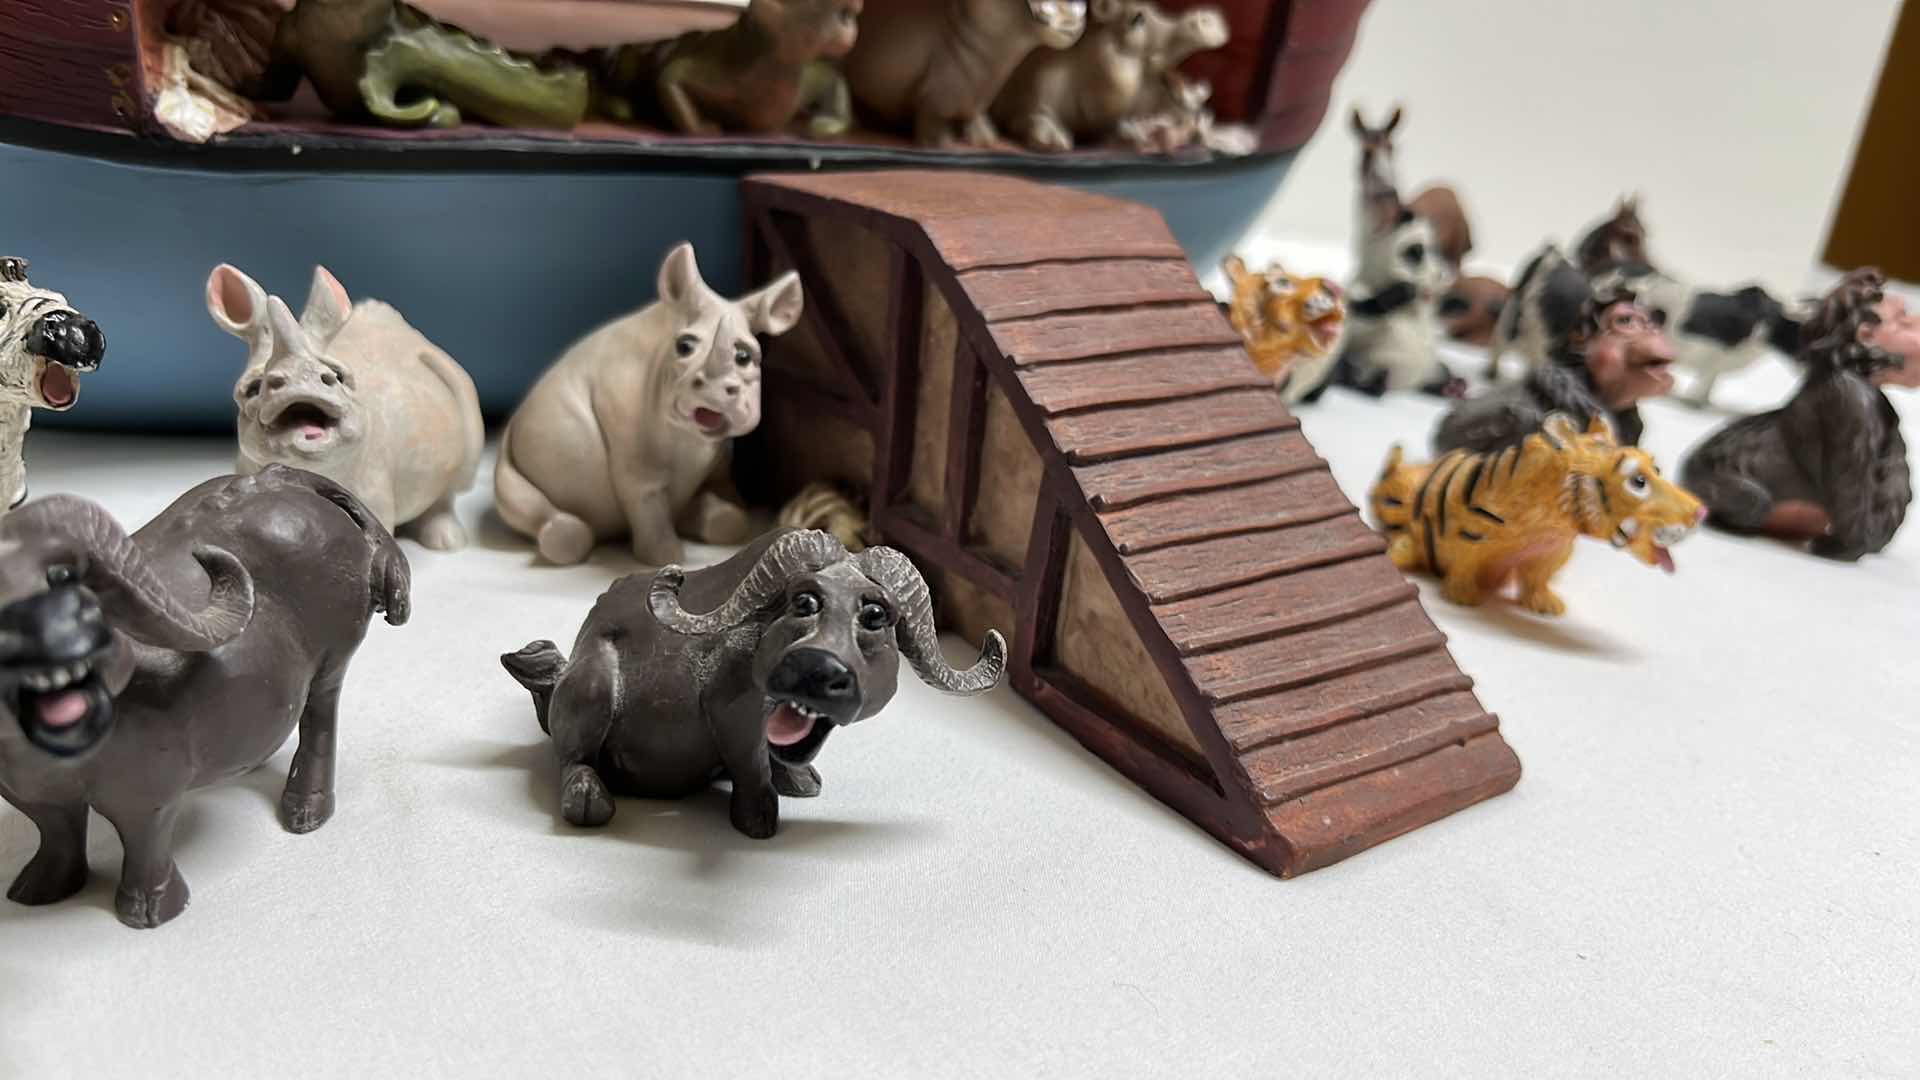 Photo 6 of NOAH’S ARK S.S. HOLY HERD COLLECTIBLES W NOAH & HIS WIFE & 34 ANIMAL FIGURINES 8.25” X 18.5” H12.5”